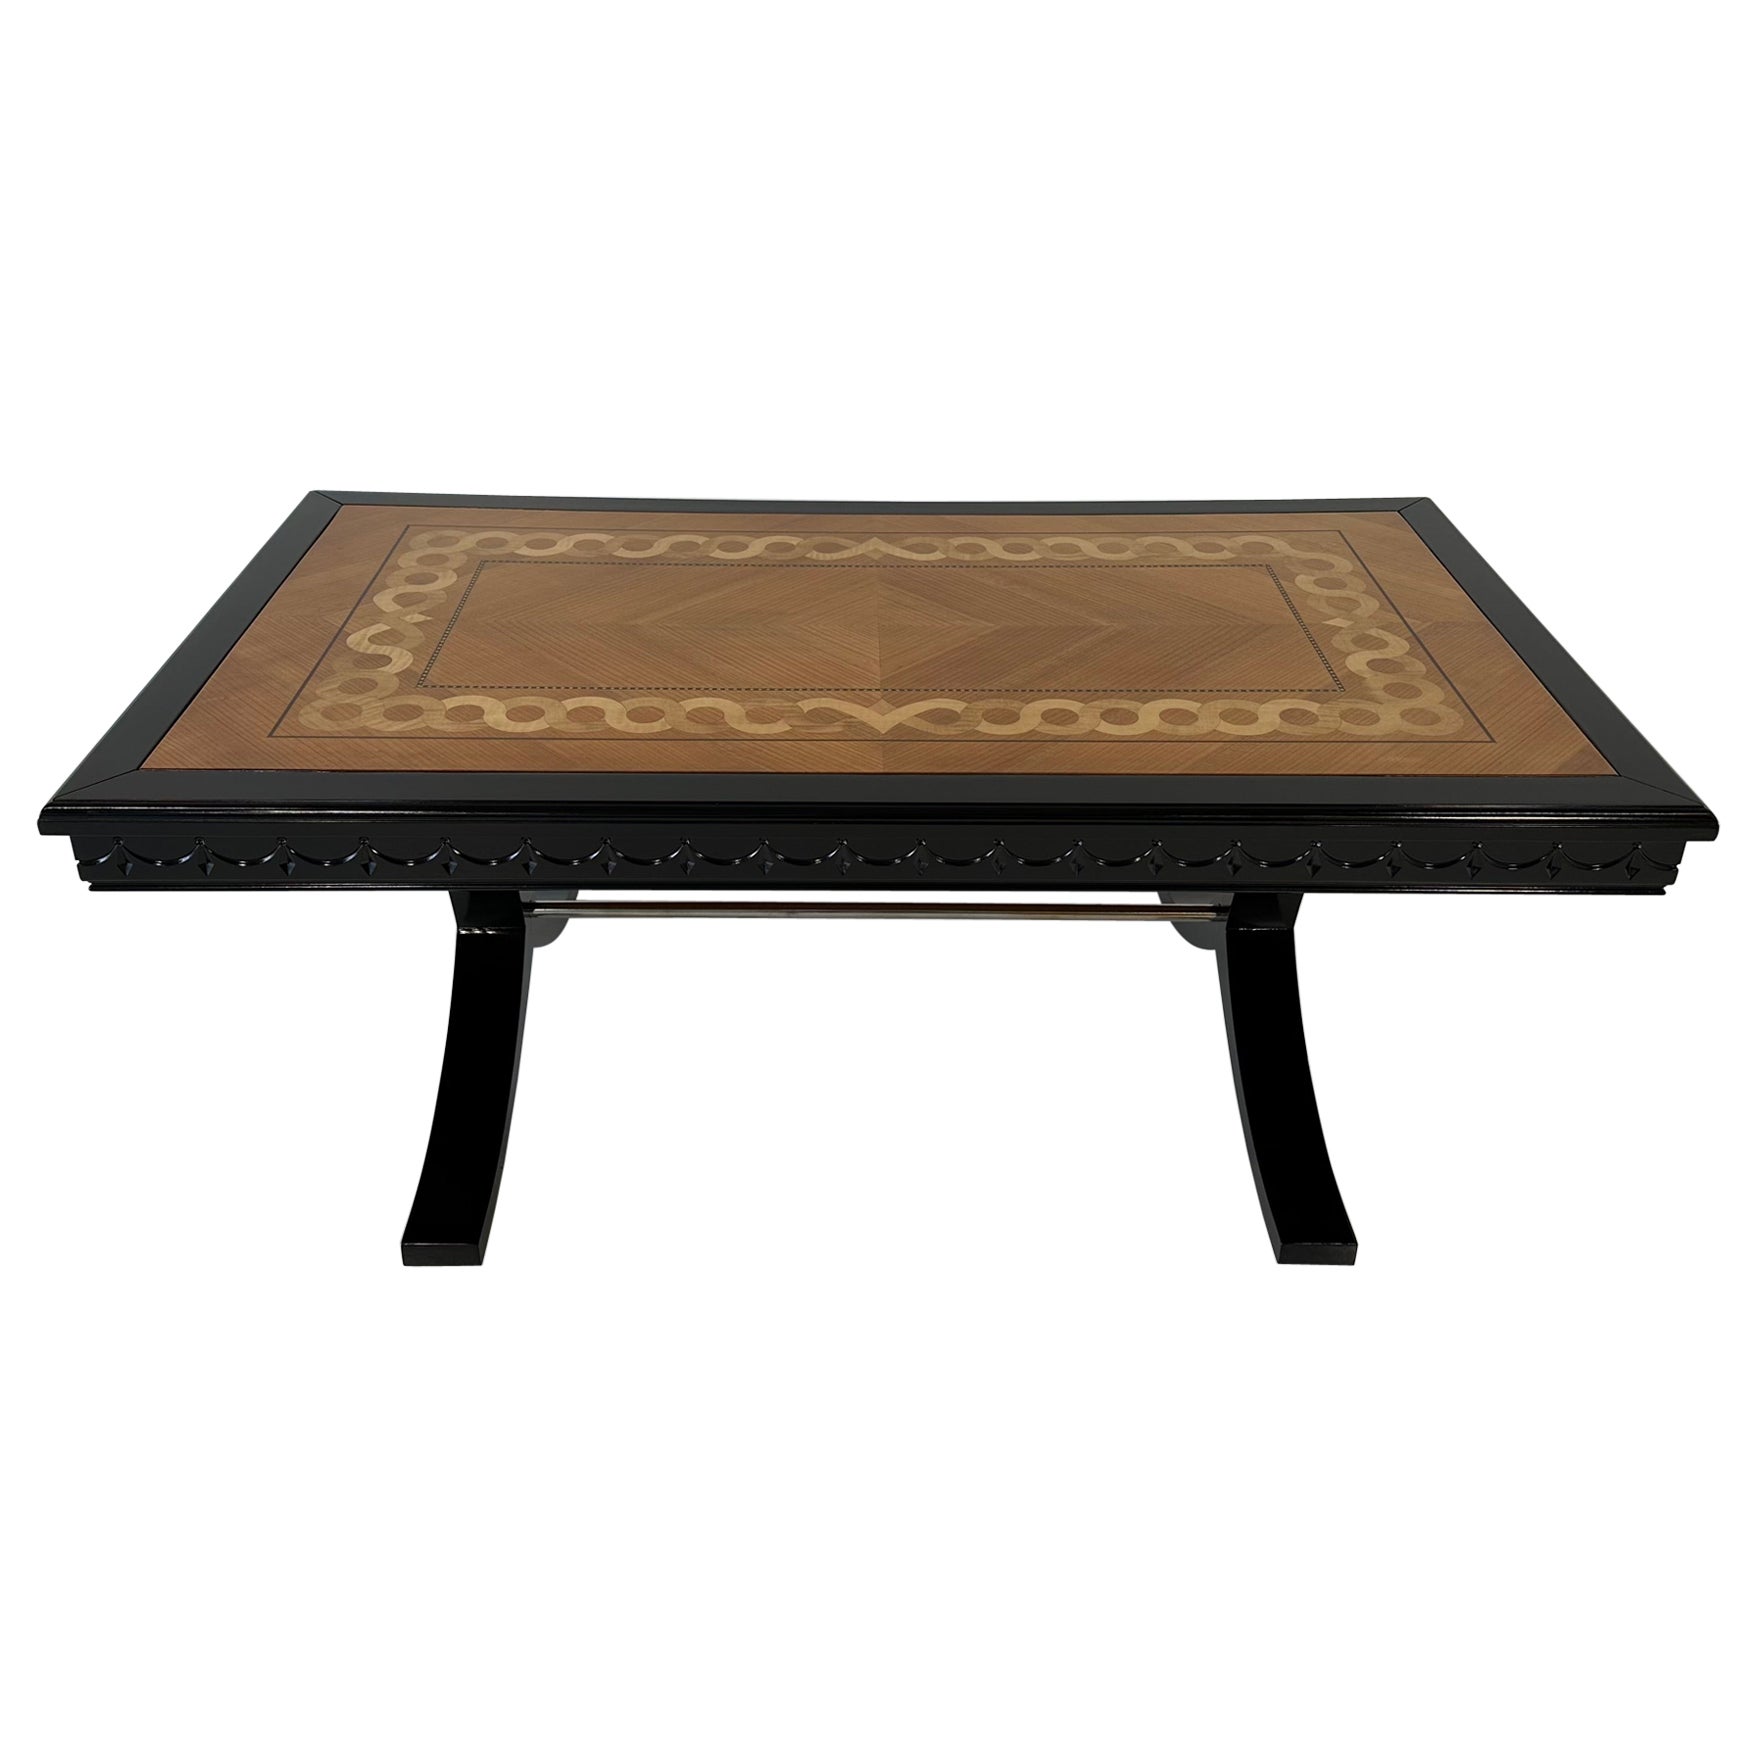 Italian Art Deco Style Maple and Ash Wood Inlaid Coffee Table, 1980s For Sale